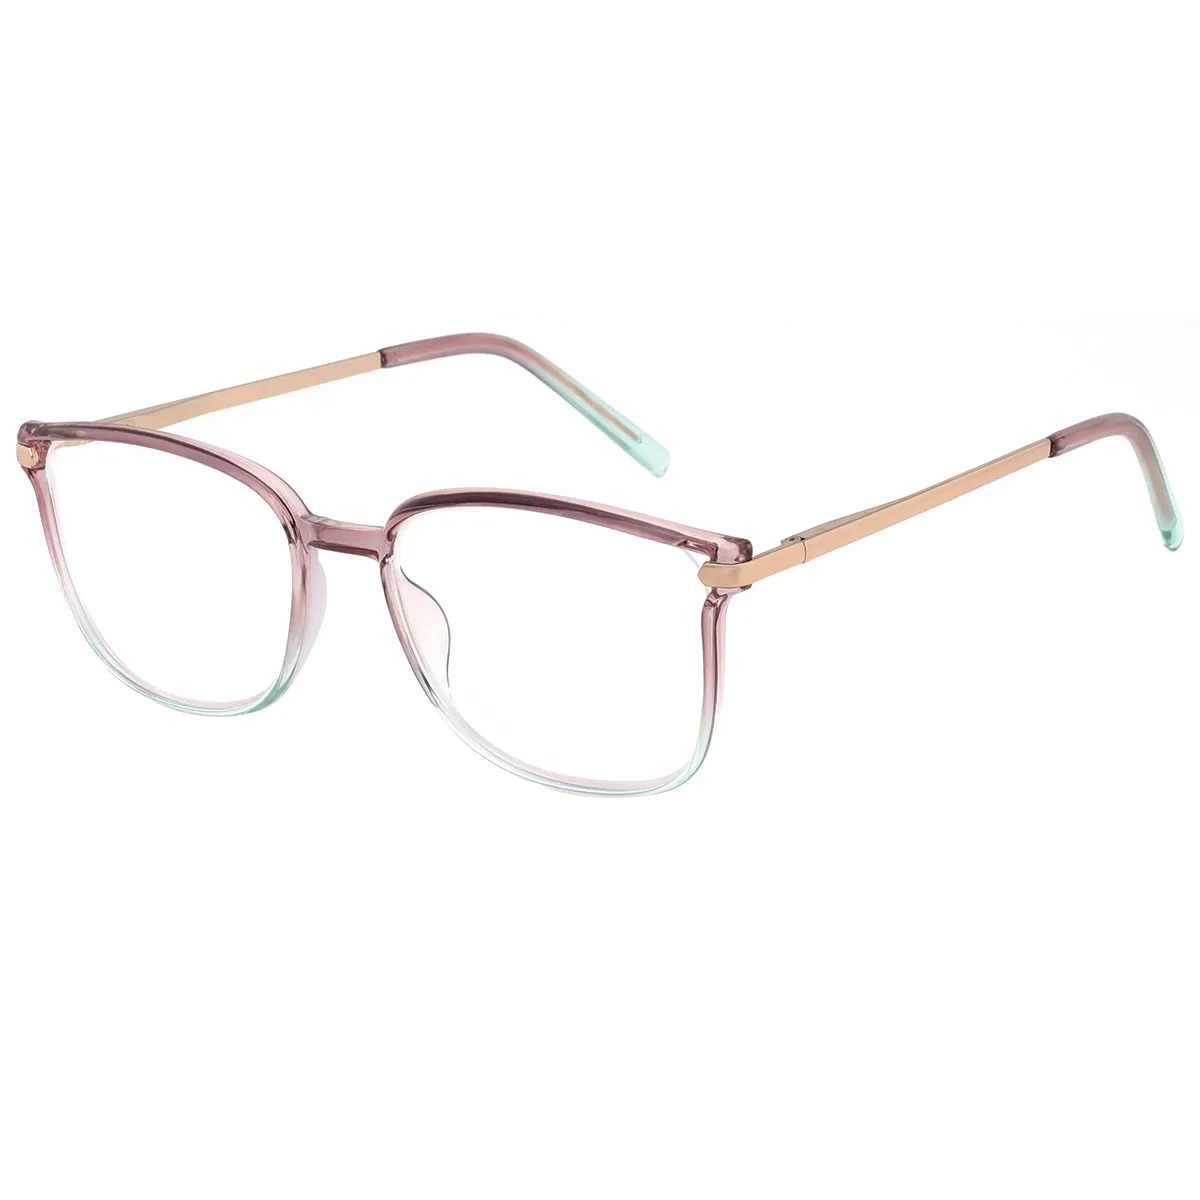 3pairs Plastic Oversized Square Frame Eyeglasses With Chain-shaped Leg,  Assorted Colors Available, Women's Fashionable Non-prescription Glasses